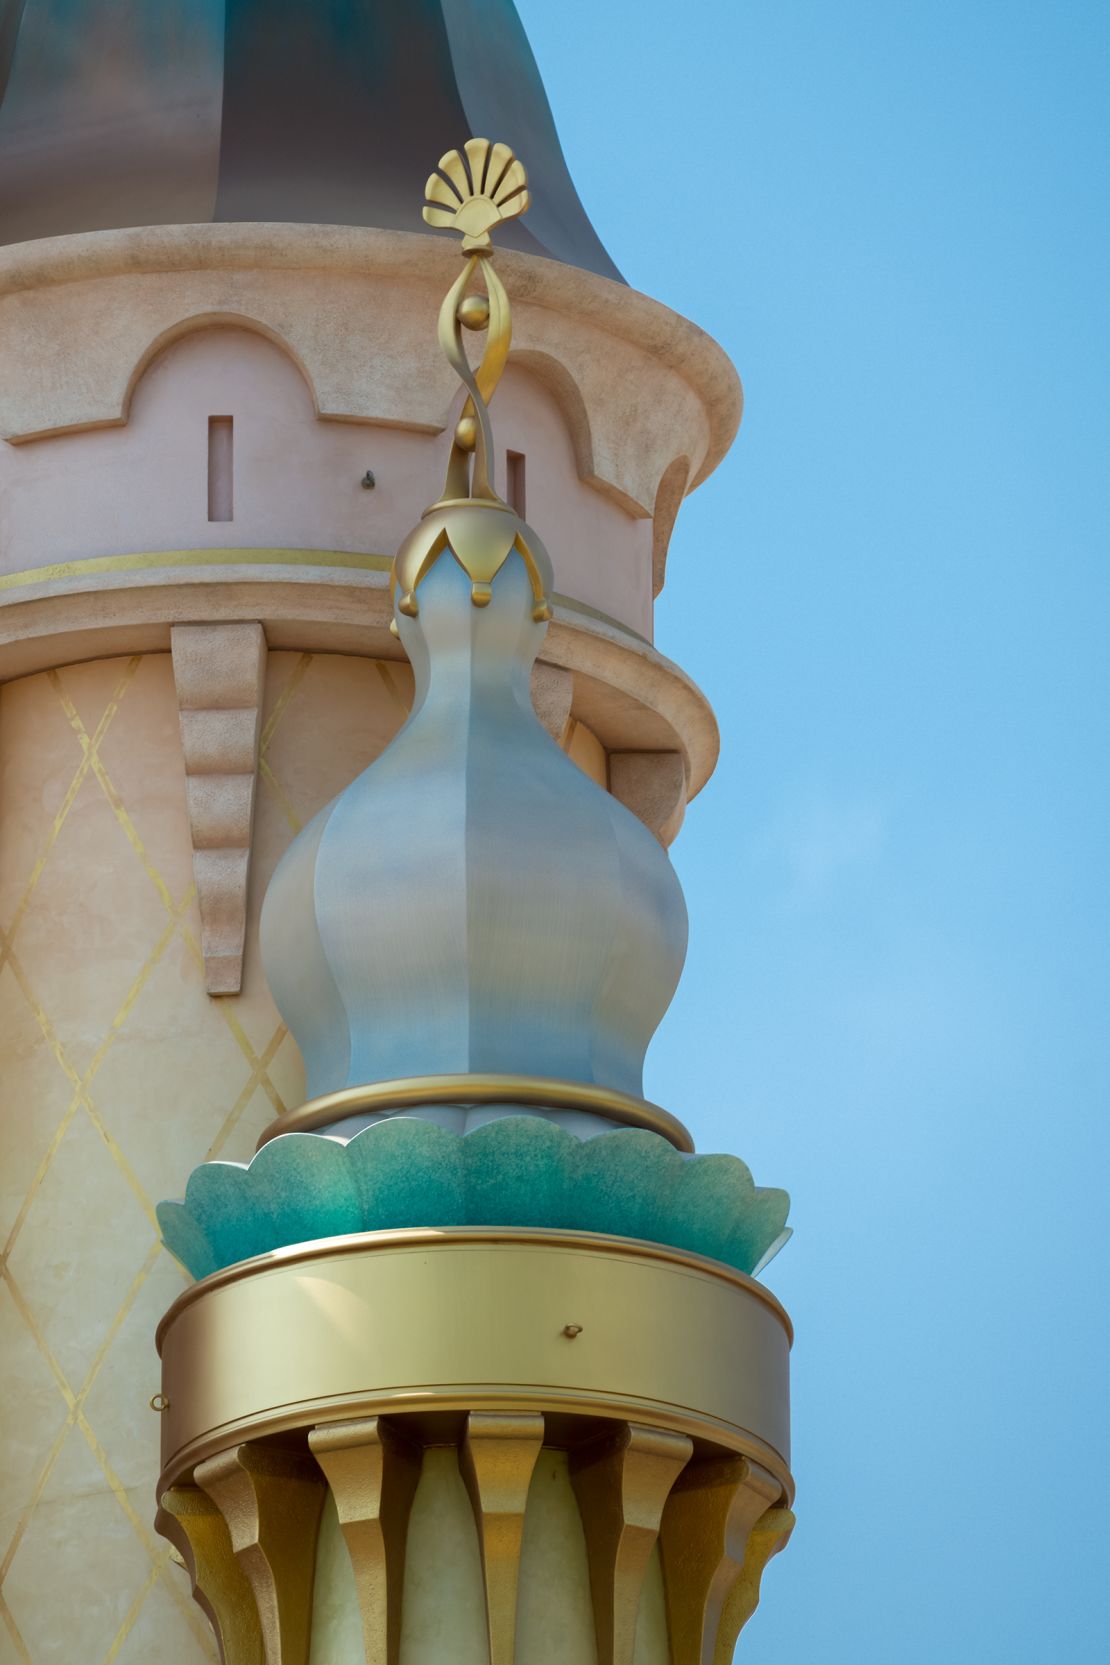 A gold seashell is the crowning feature atop Princess Ariel's tower.